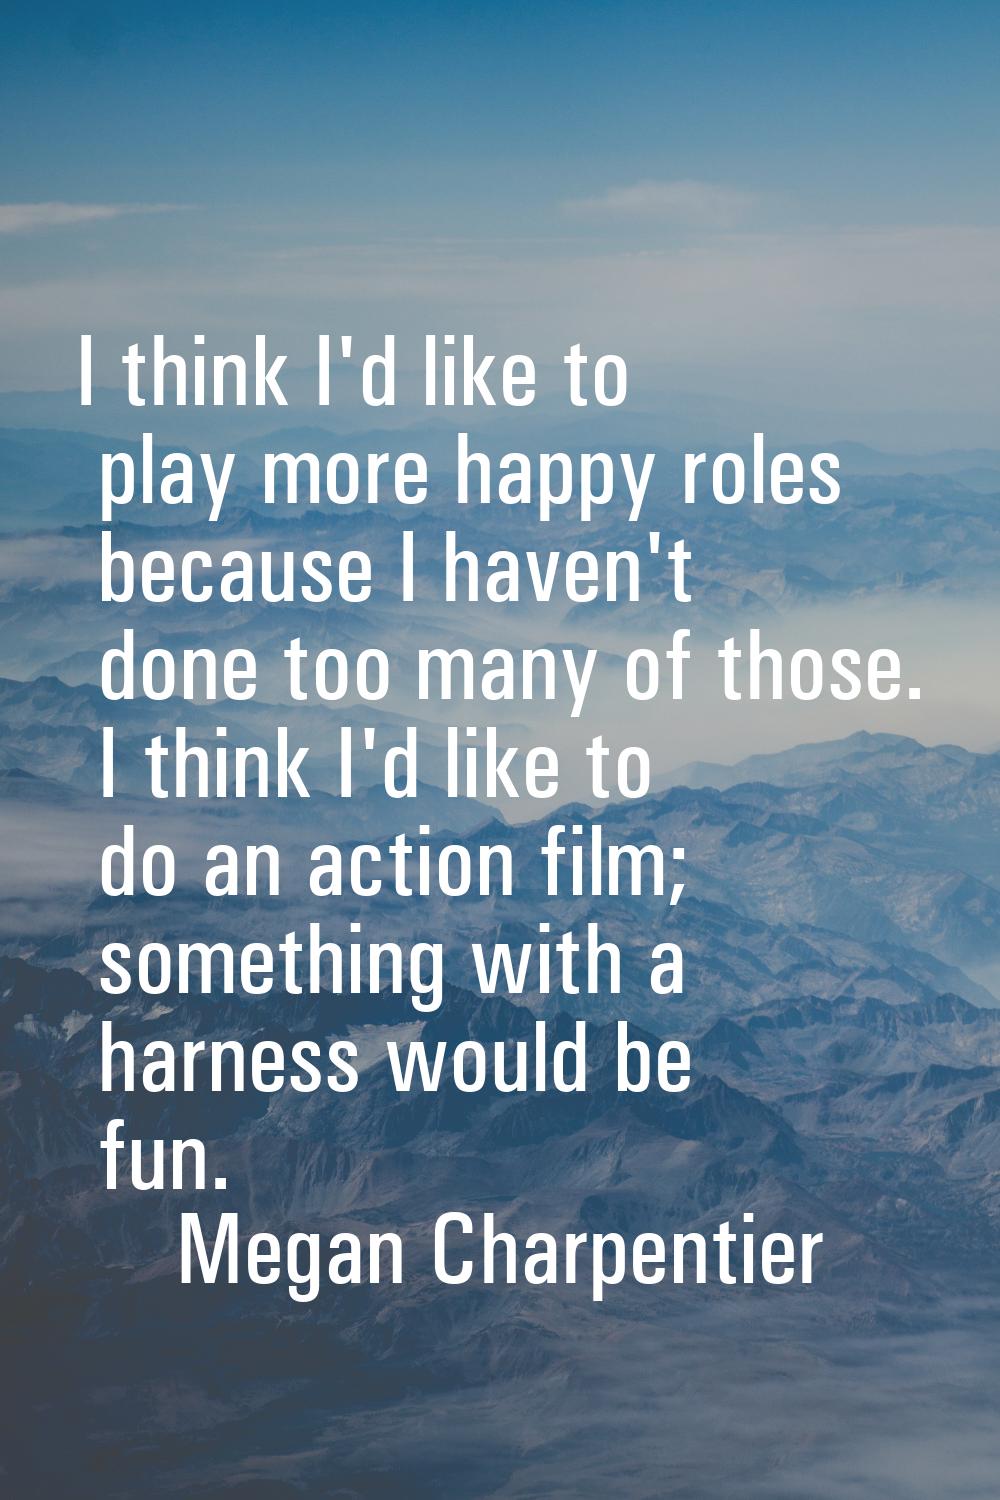 I think I'd like to play more happy roles because I haven't done too many of those. I think I'd lik